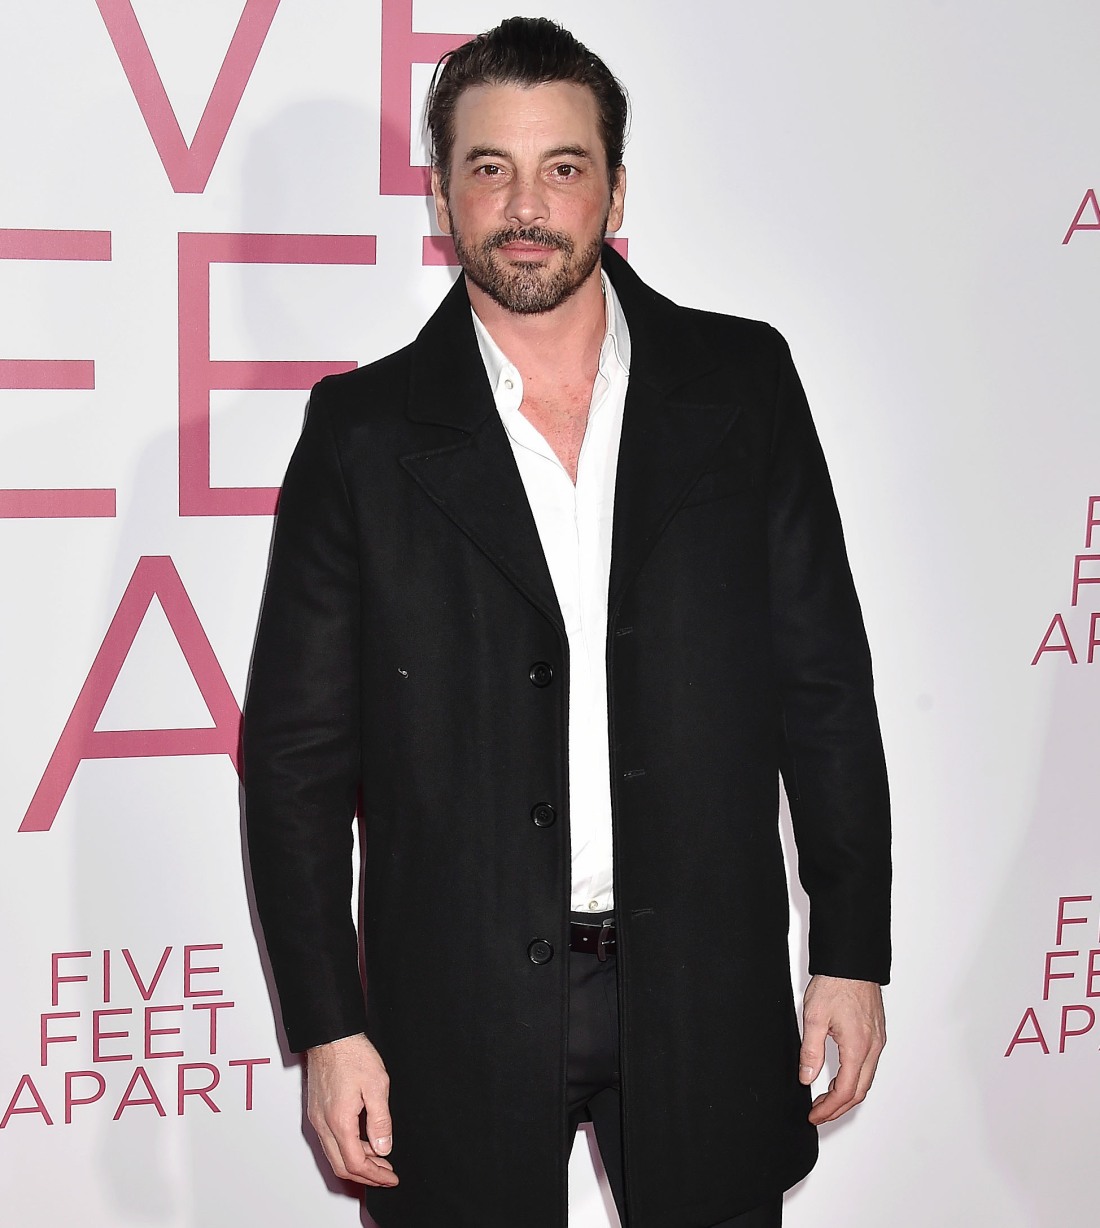 Skeet Ulrich at the Premiere of Lionsgate's 'Five Feet Apart' in Los Angeles